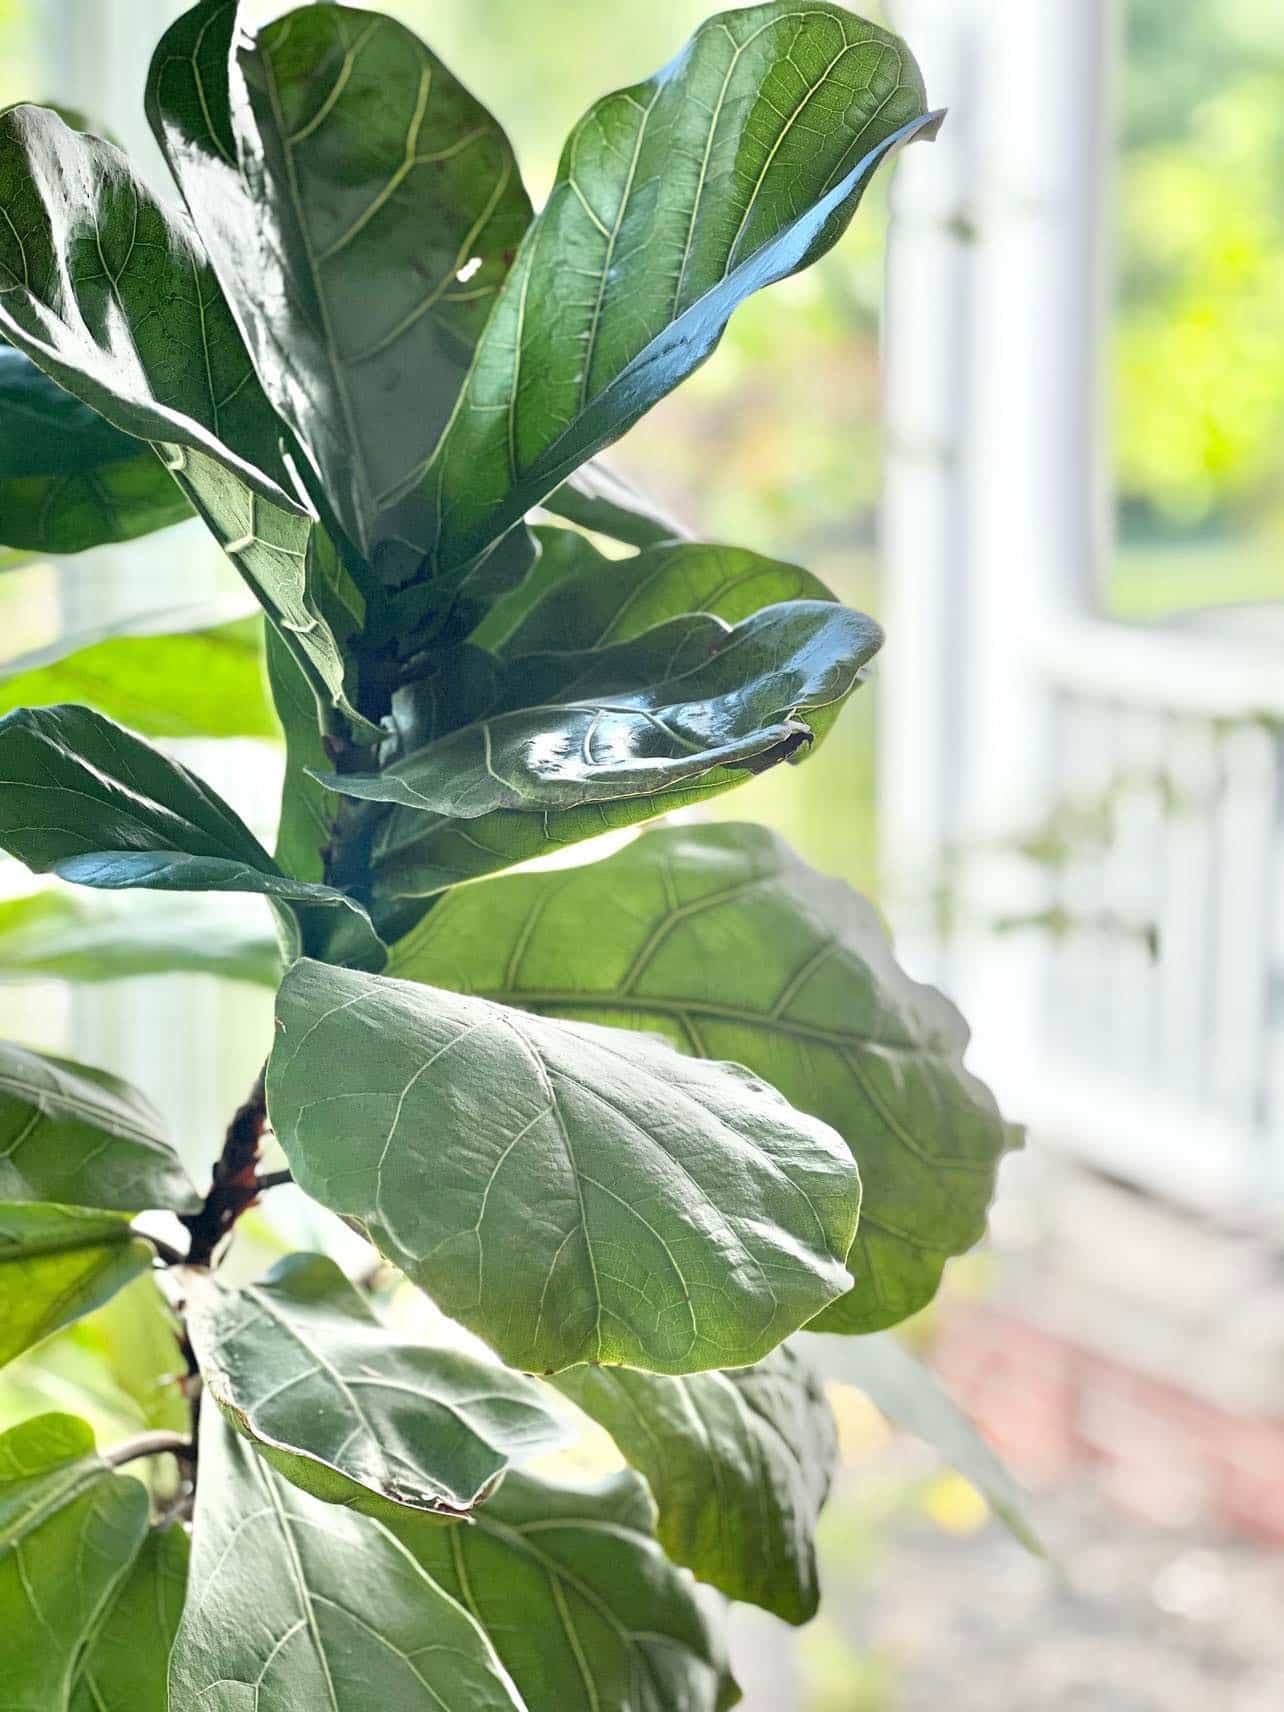 How to Propagate Fiddle Leaf Fig Cuttings in Water